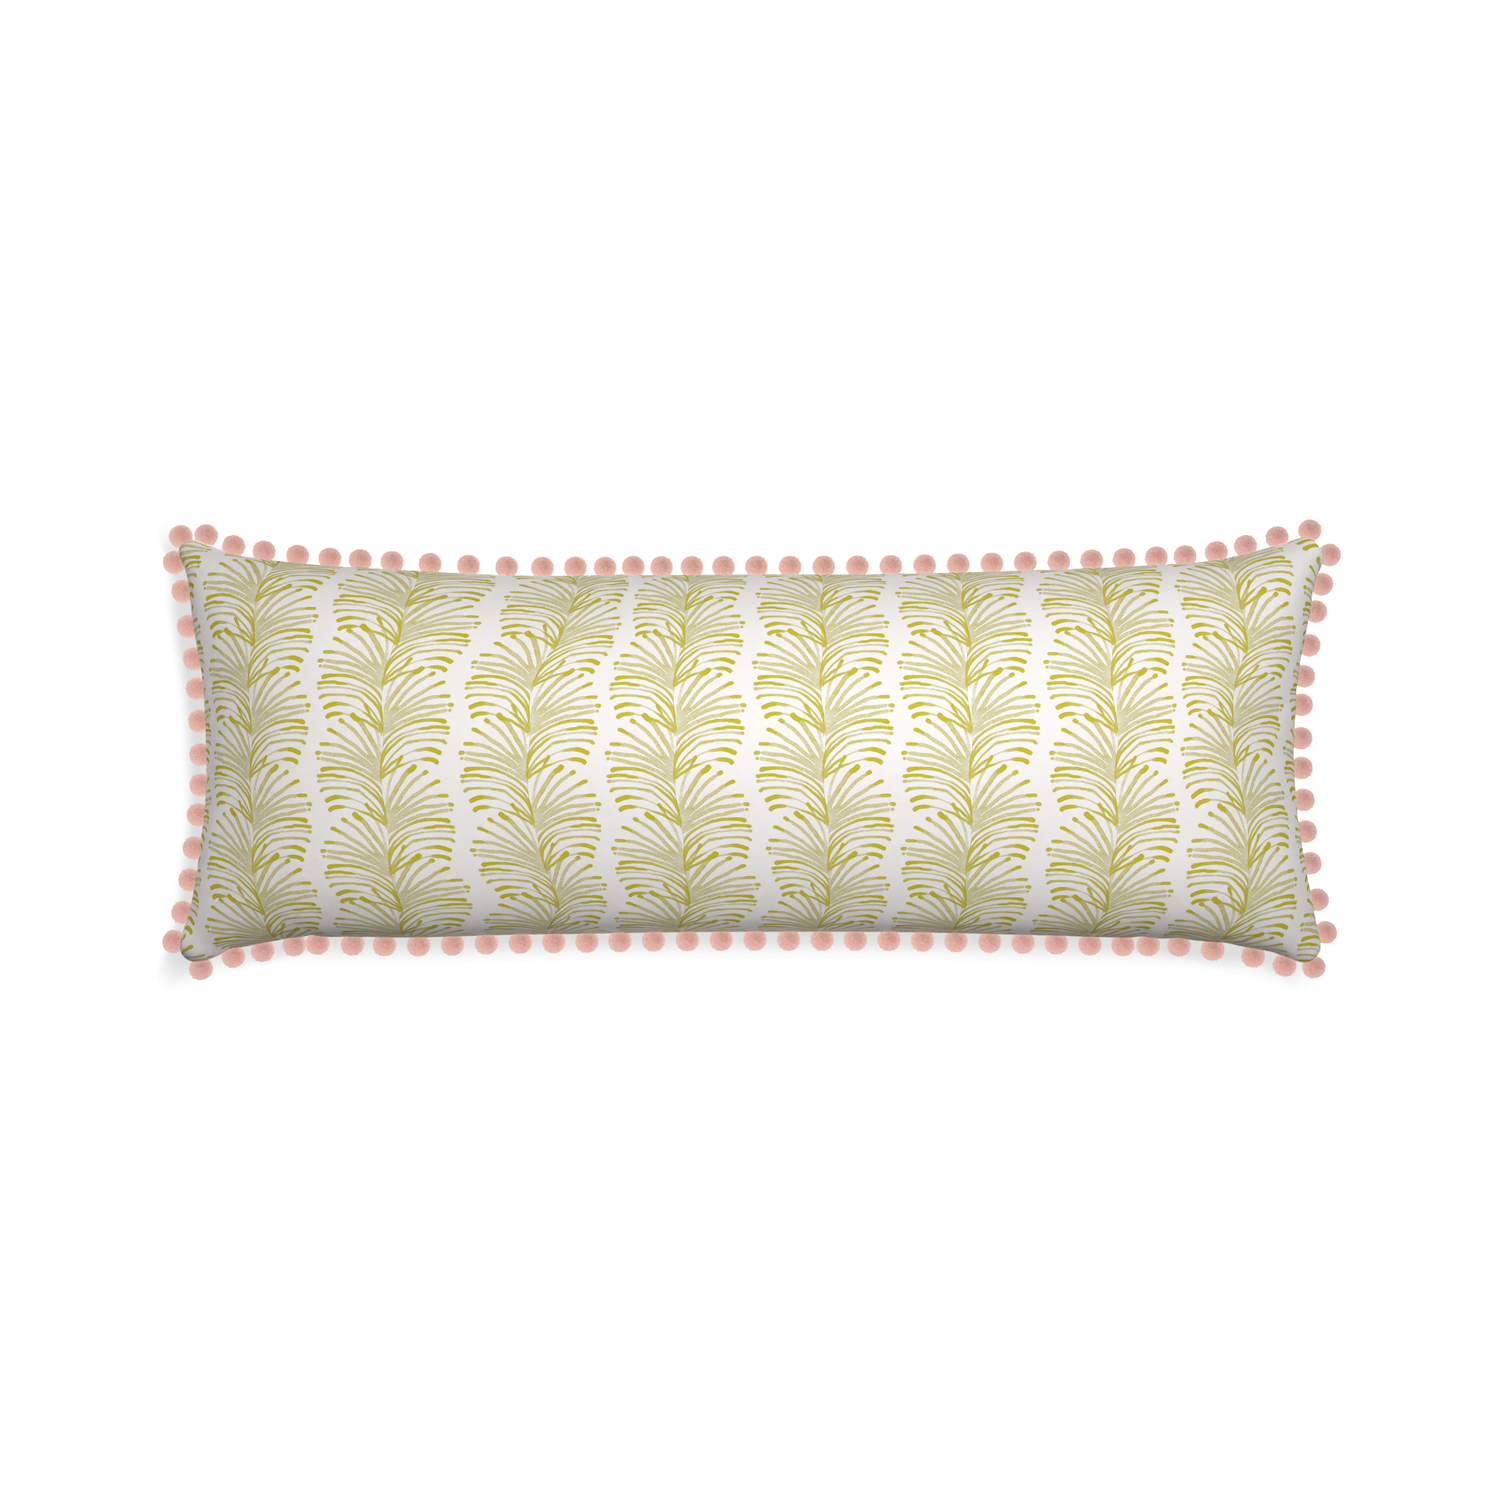 Xl-lumbar emma chartreuse custom yellow stripe chartreusepillow with rose pom pom on white background